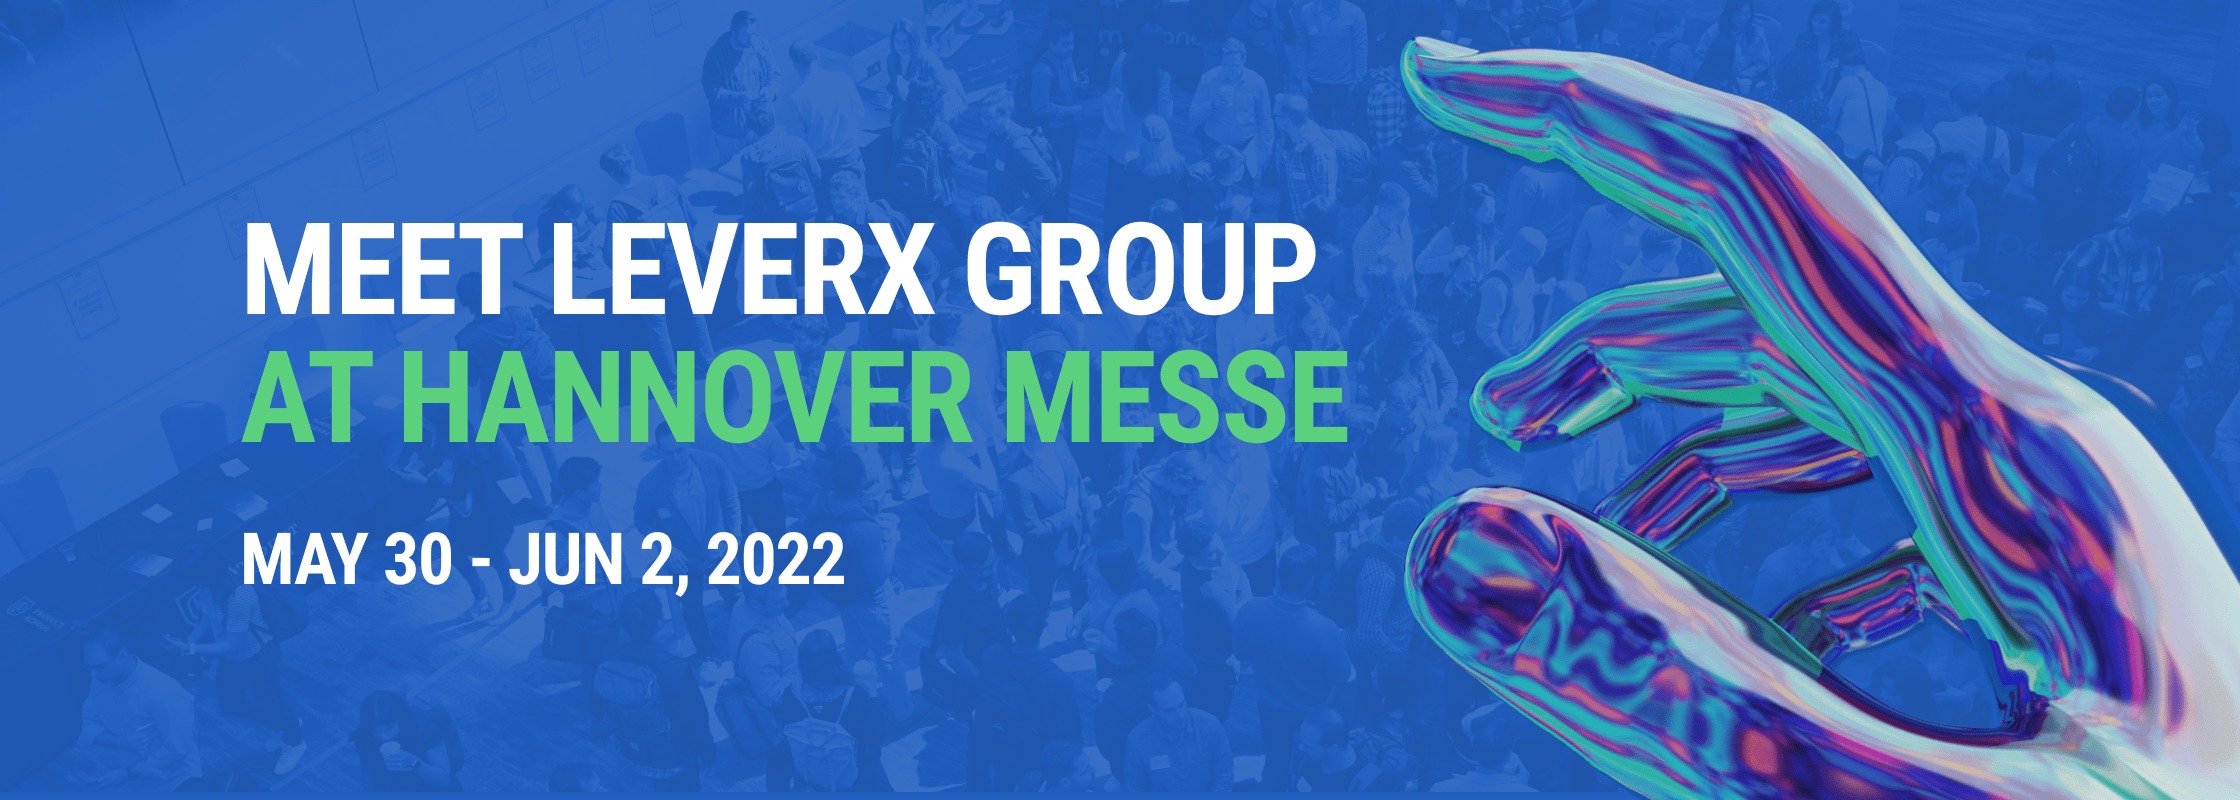 LeverX at Hannover Messe 2022